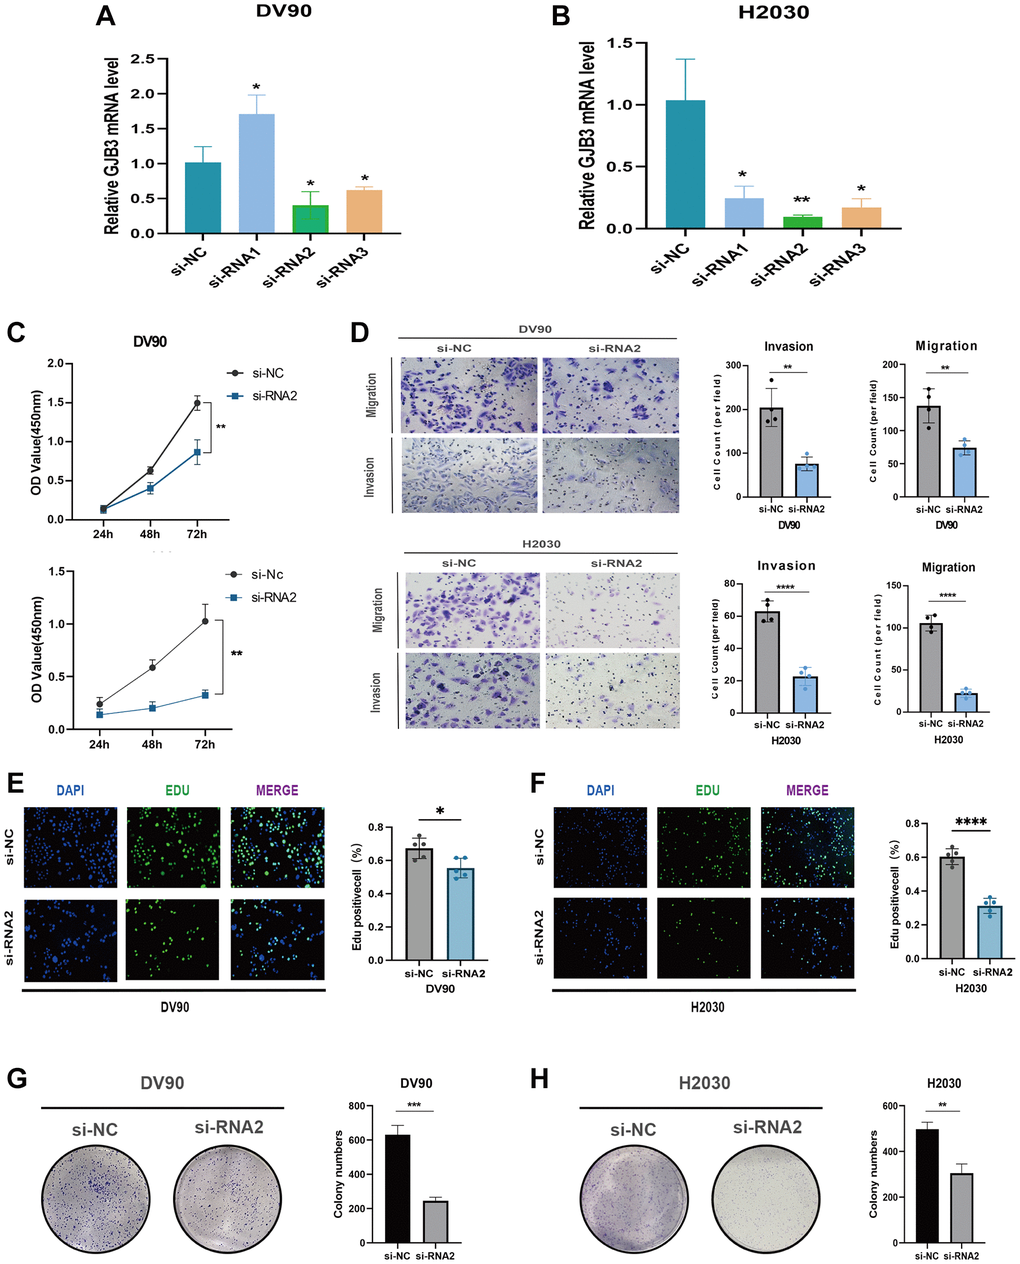 GJB3 knockdown inhibits the growth and migration of LUAD cells in vitro. (A, B) Verification of knockdown efficiency of GJB3 in DV90 (A) and H2030 (B) cell lines. (C–H) The biological functions of GJB3 in LUAD cell lines were verified by CCK-8 (C), transwell (D), EDU (E, F), and colony formation (G, H). (*P **P ***P ****P 